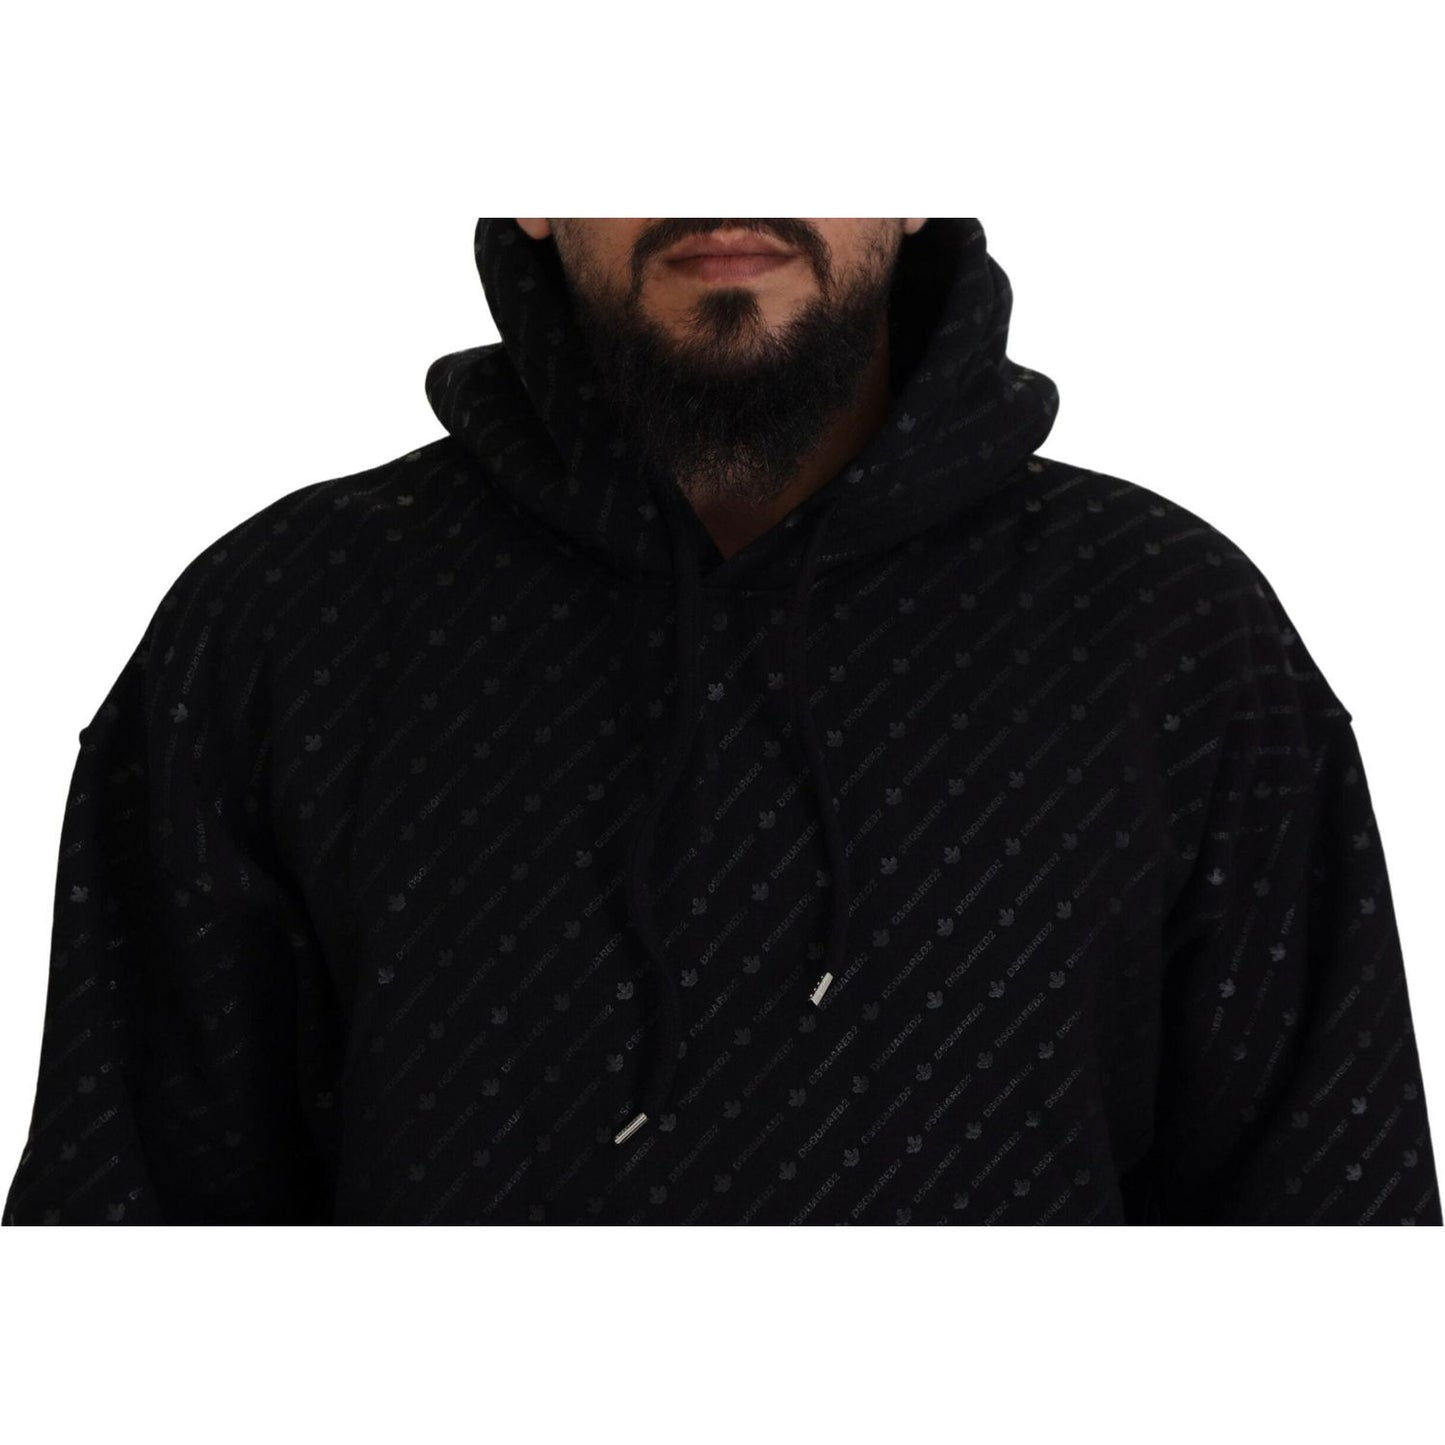 Dsquared² Black Cotton Hooded Printed Men Pullover Sweater black-cotton-hooded-printed-men-pullover-sweater-3